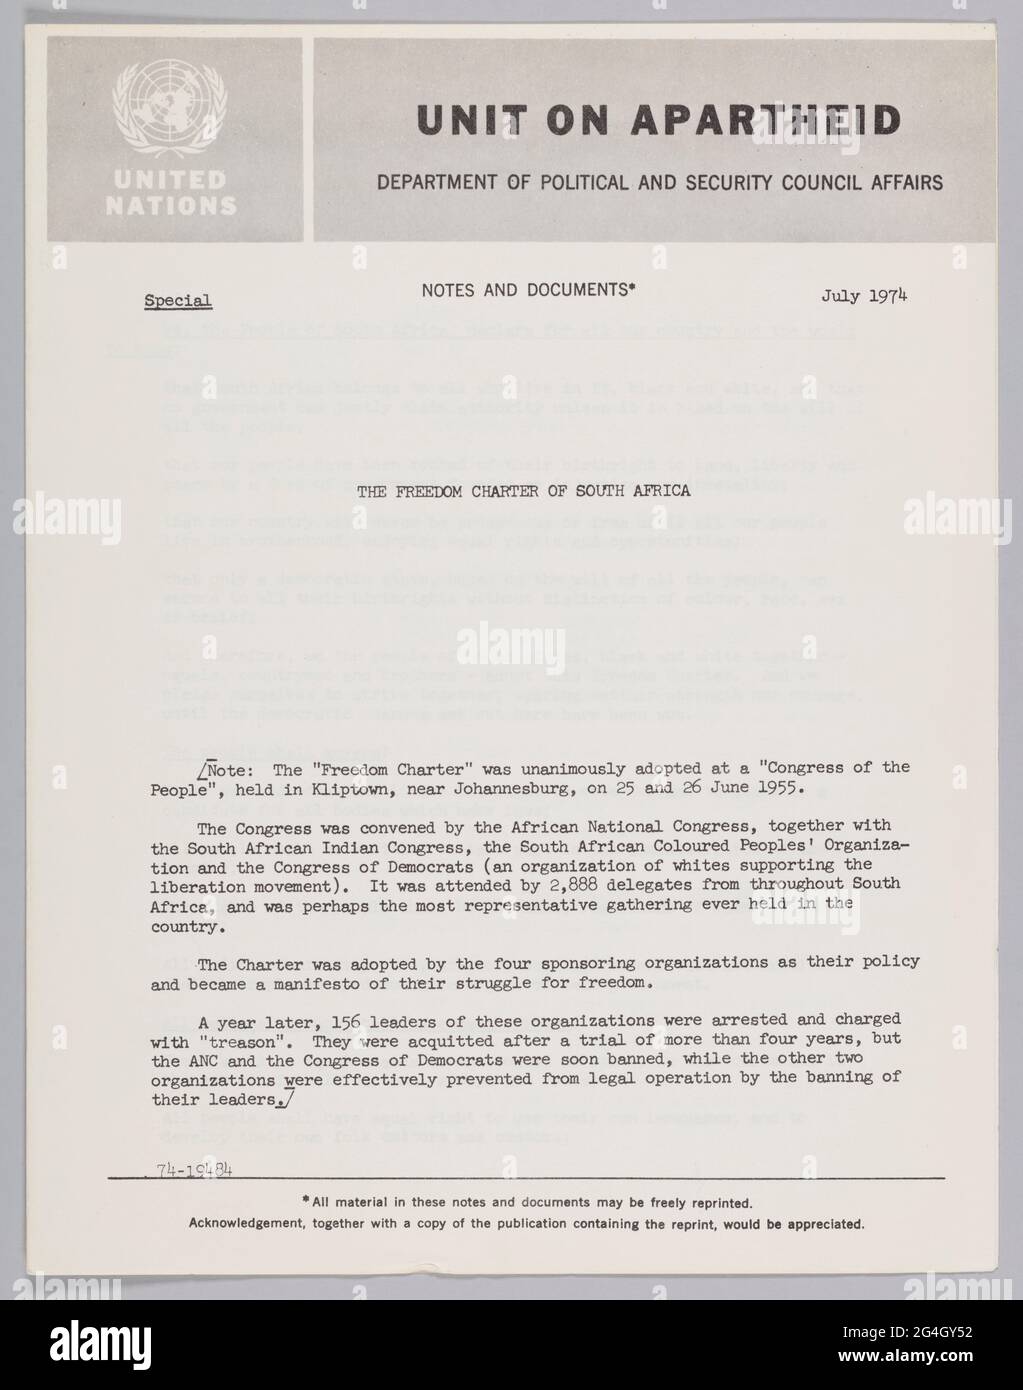 This special note from the United Nations' Unit on Apartheid details the Freedom Charter of South Africa. The booklet is four pages long. The title page features the United Nations logo in the top left corner inside of a grey header that extends the width of the page. The title is also printed inside this header and reads: [UNIT ON APARTHEID / DEPARTMENT OF POLITICAL AND SECURITY COUNCIL AFFAIRS]. Typed text fills the rest of the page. The back of each page is blank. Apartheid, a system of institutionalised racial segregation, existed in South Africa and South West Africa (now Namibia) from 19 Stock Photo